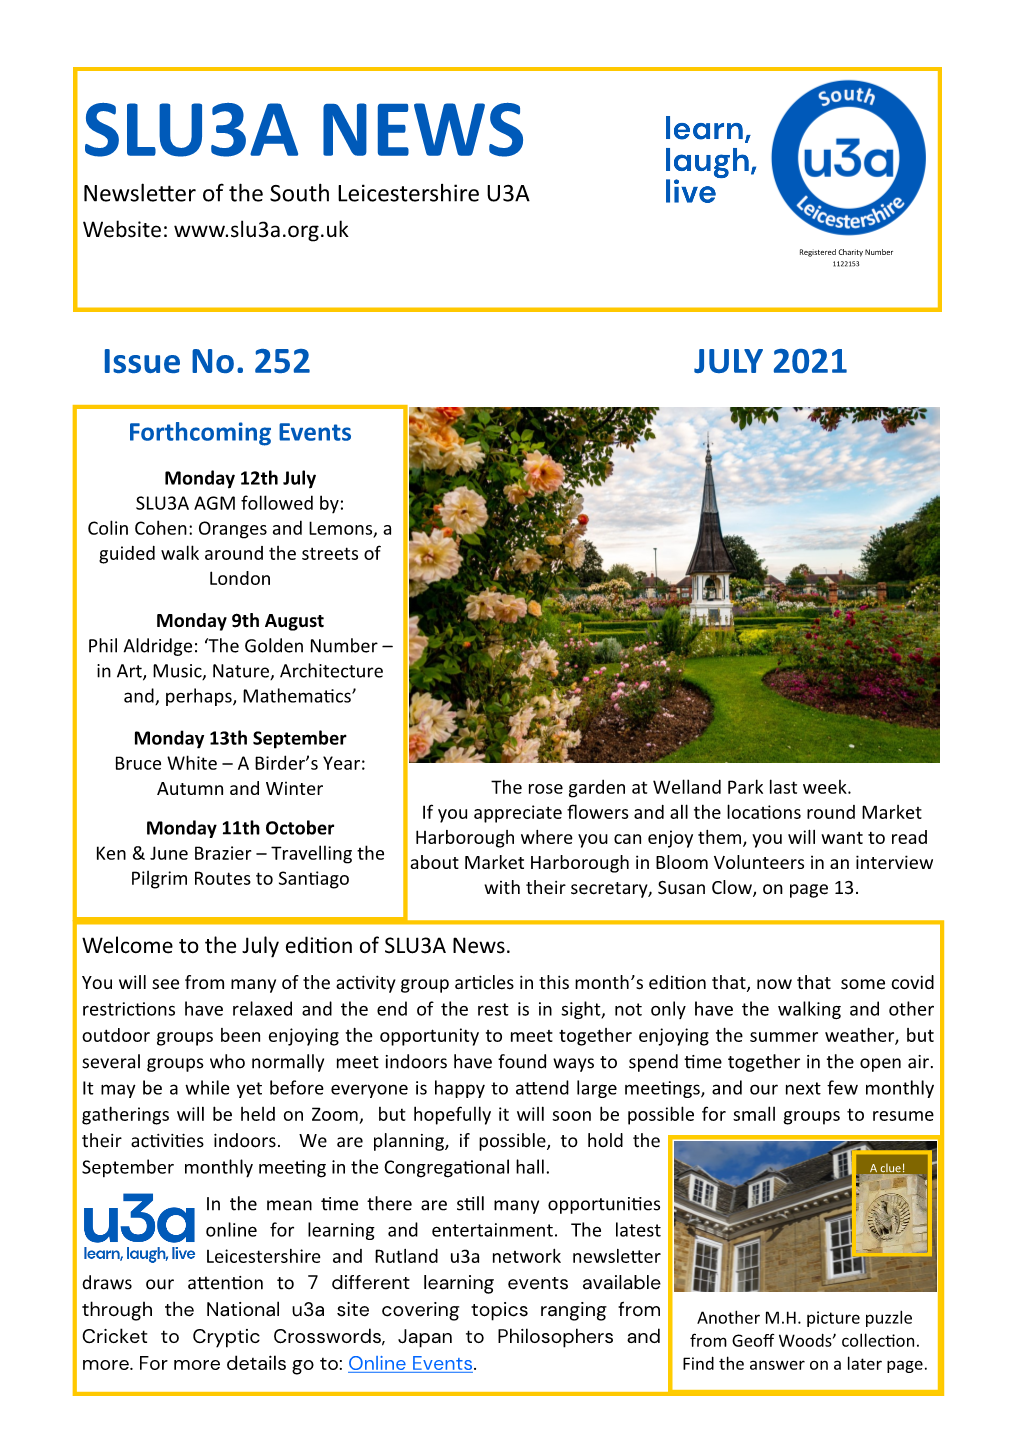 SLU3A NEWS Newsletter of the South Leicestershire U3A Website: Registered Charity Number 1122153